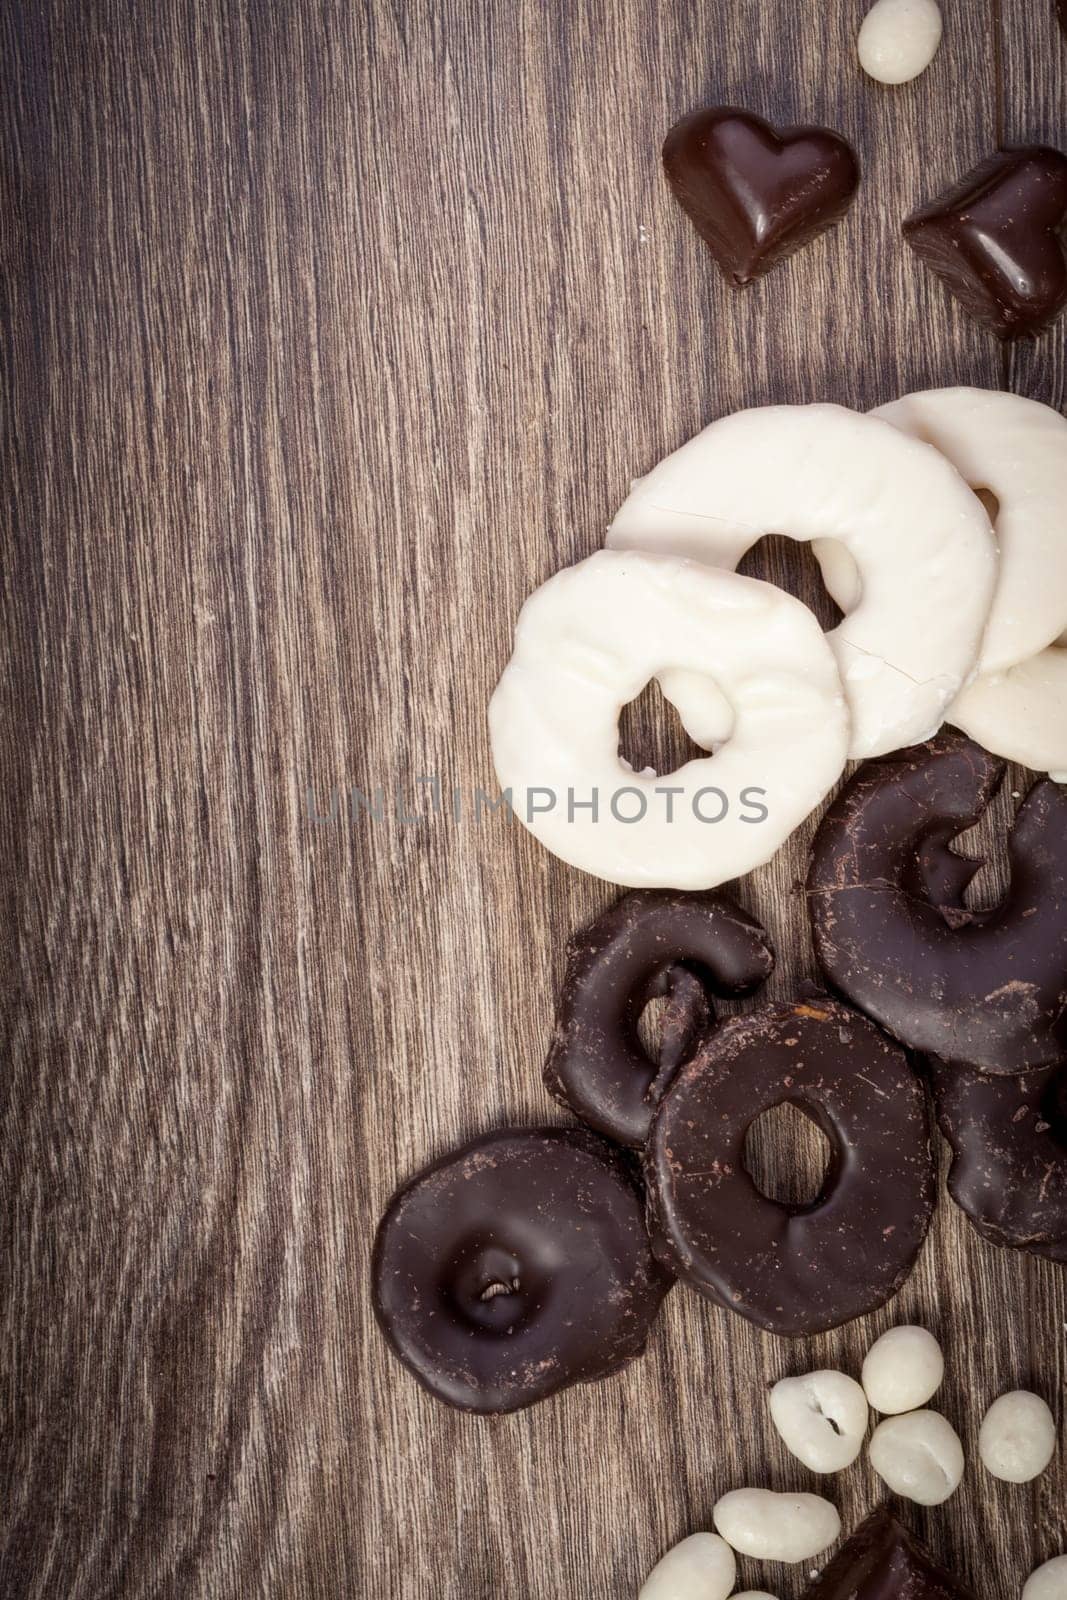 Chocolate and heart shaped desert on wooden background by DCStudio